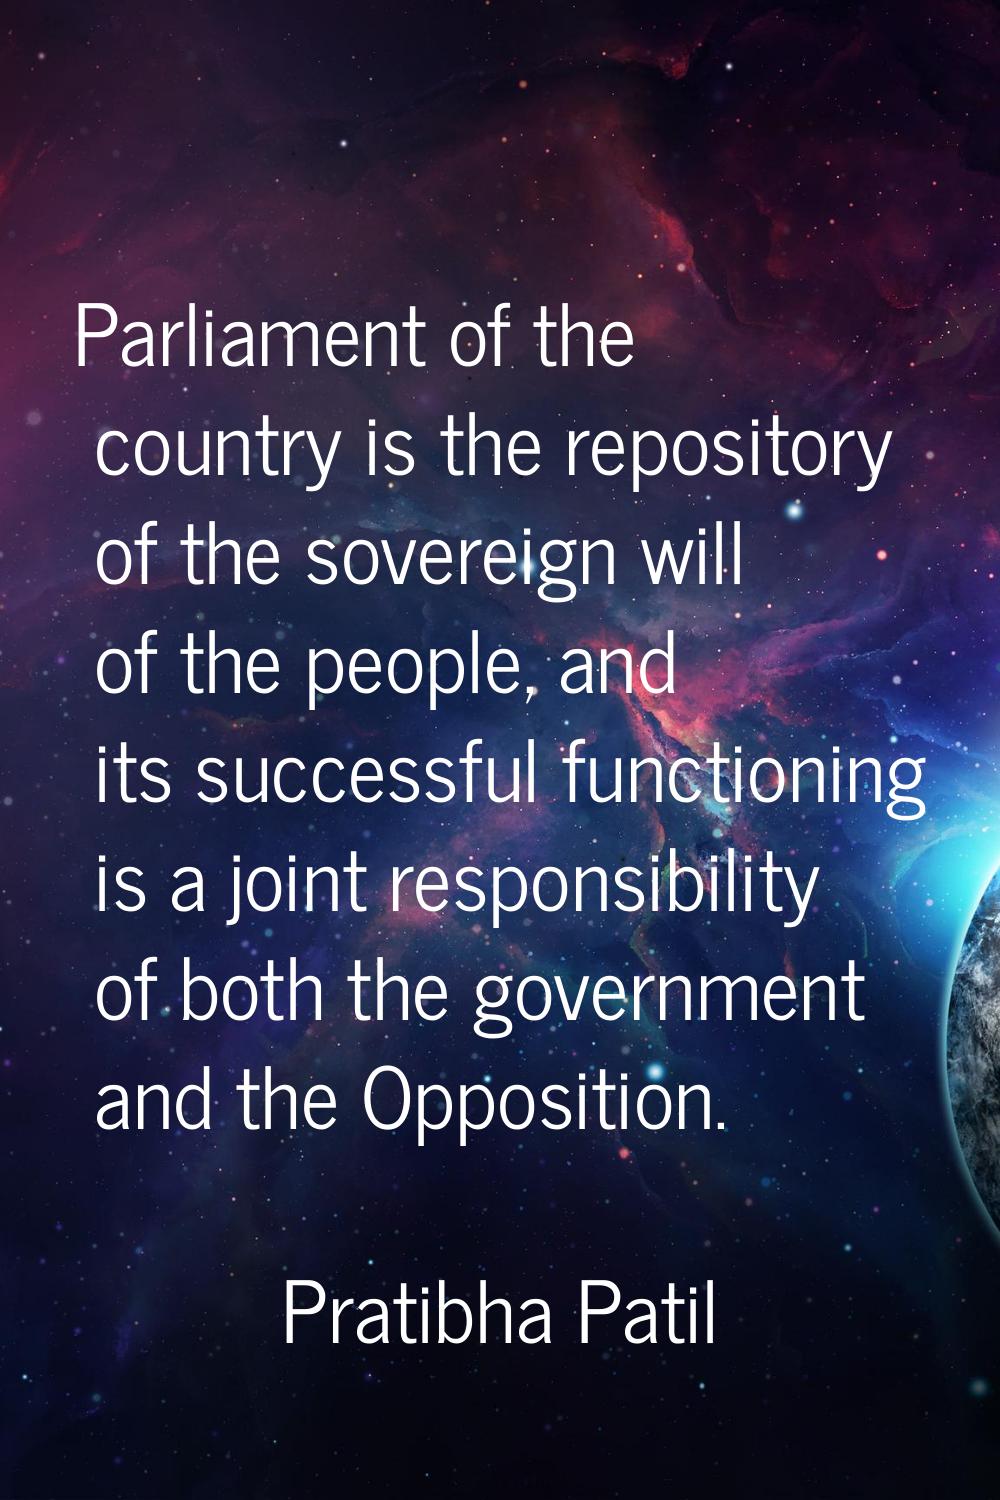 Parliament of the country is the repository of the sovereign will of the people, and its successful